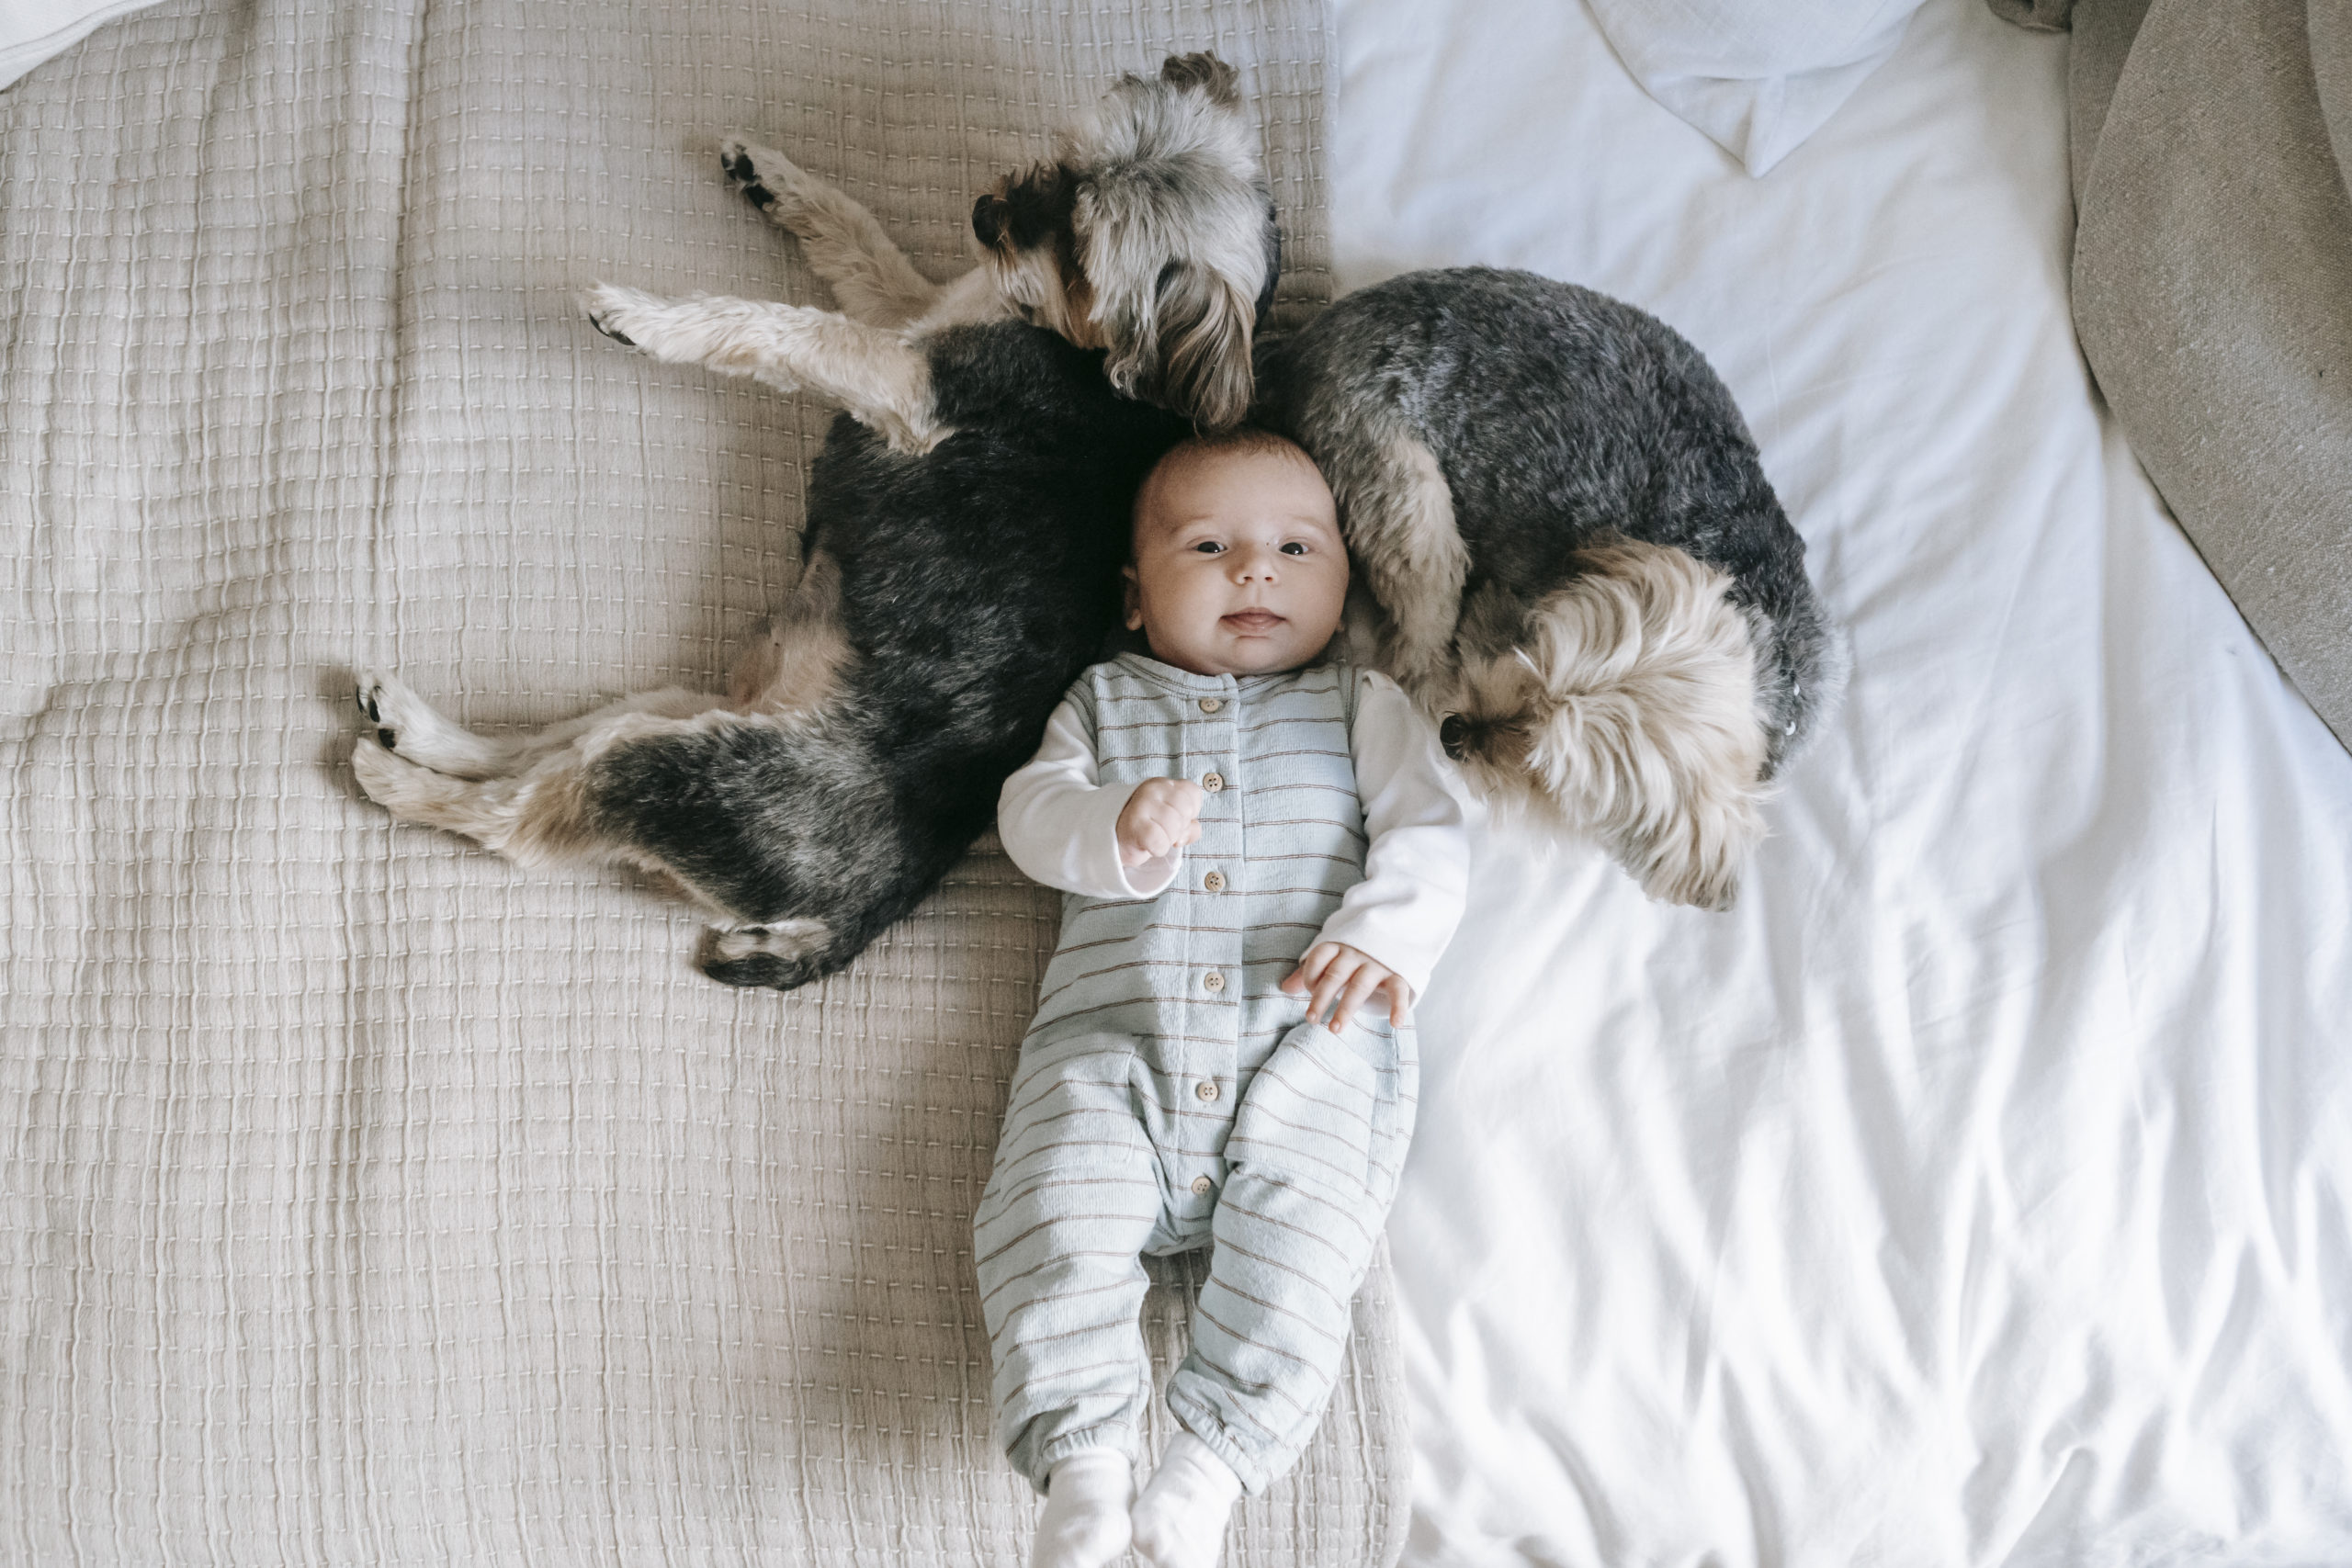 Babies and Pets: Can They Co-Exist?